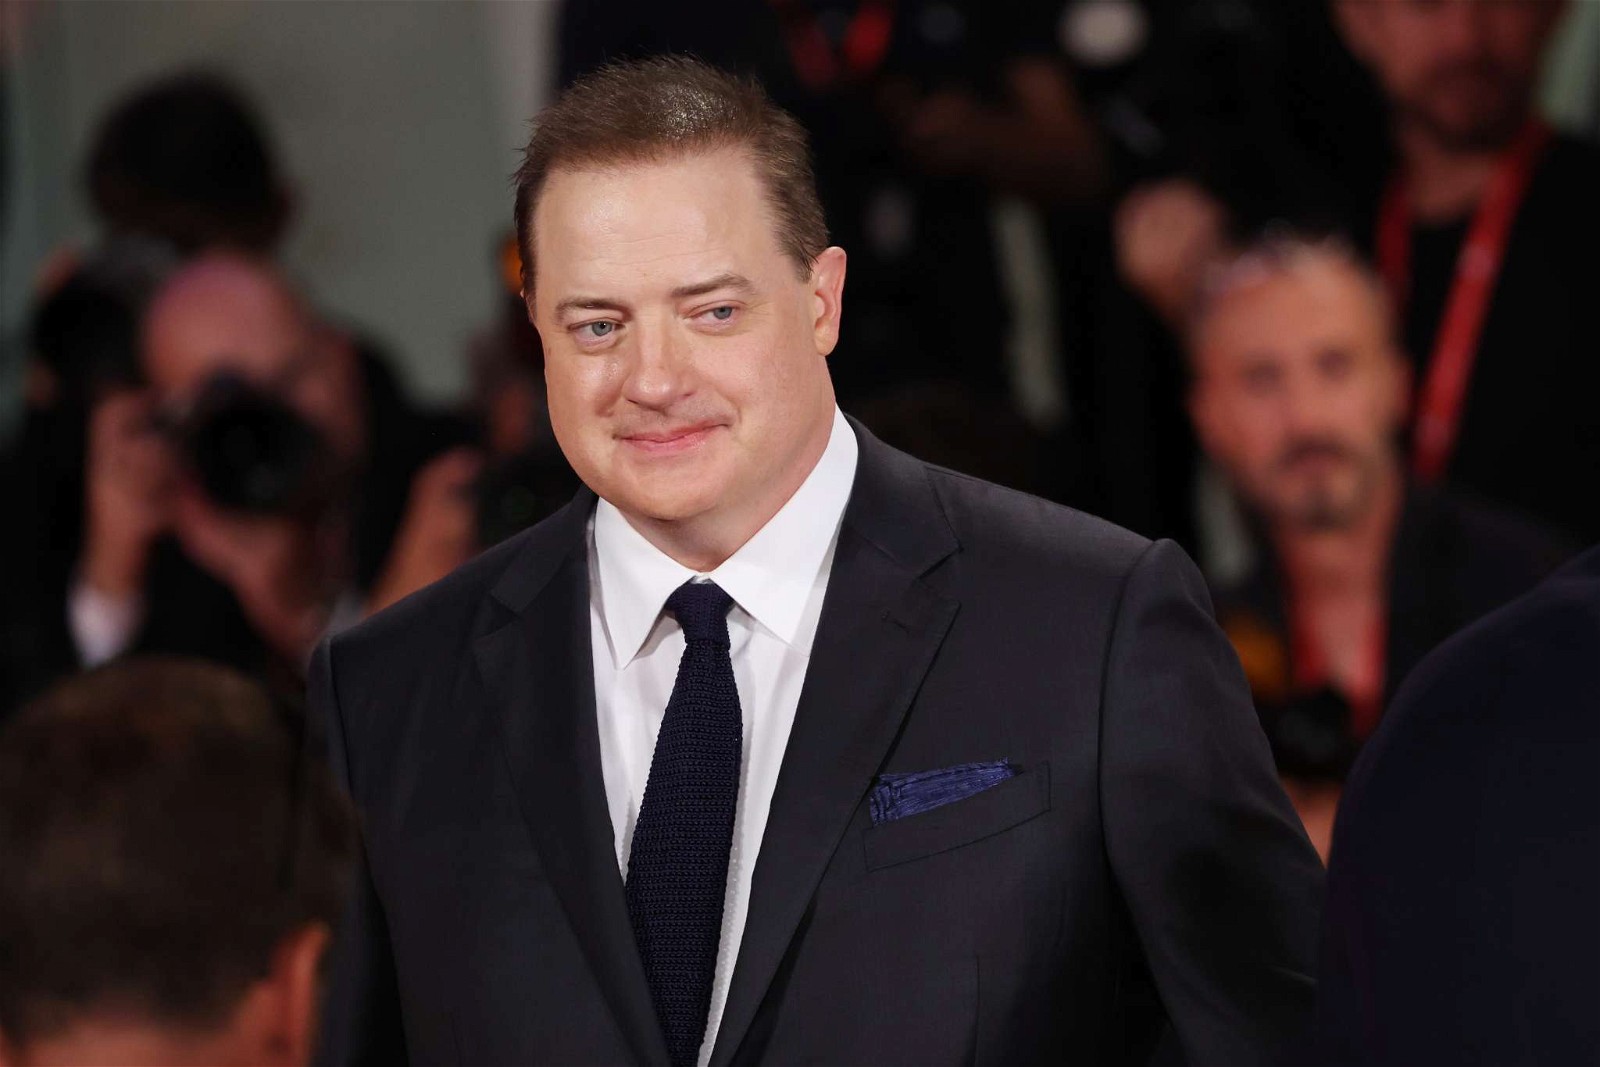 Brendan Fraser was devastated after everything that unfolded between him and the HFPA